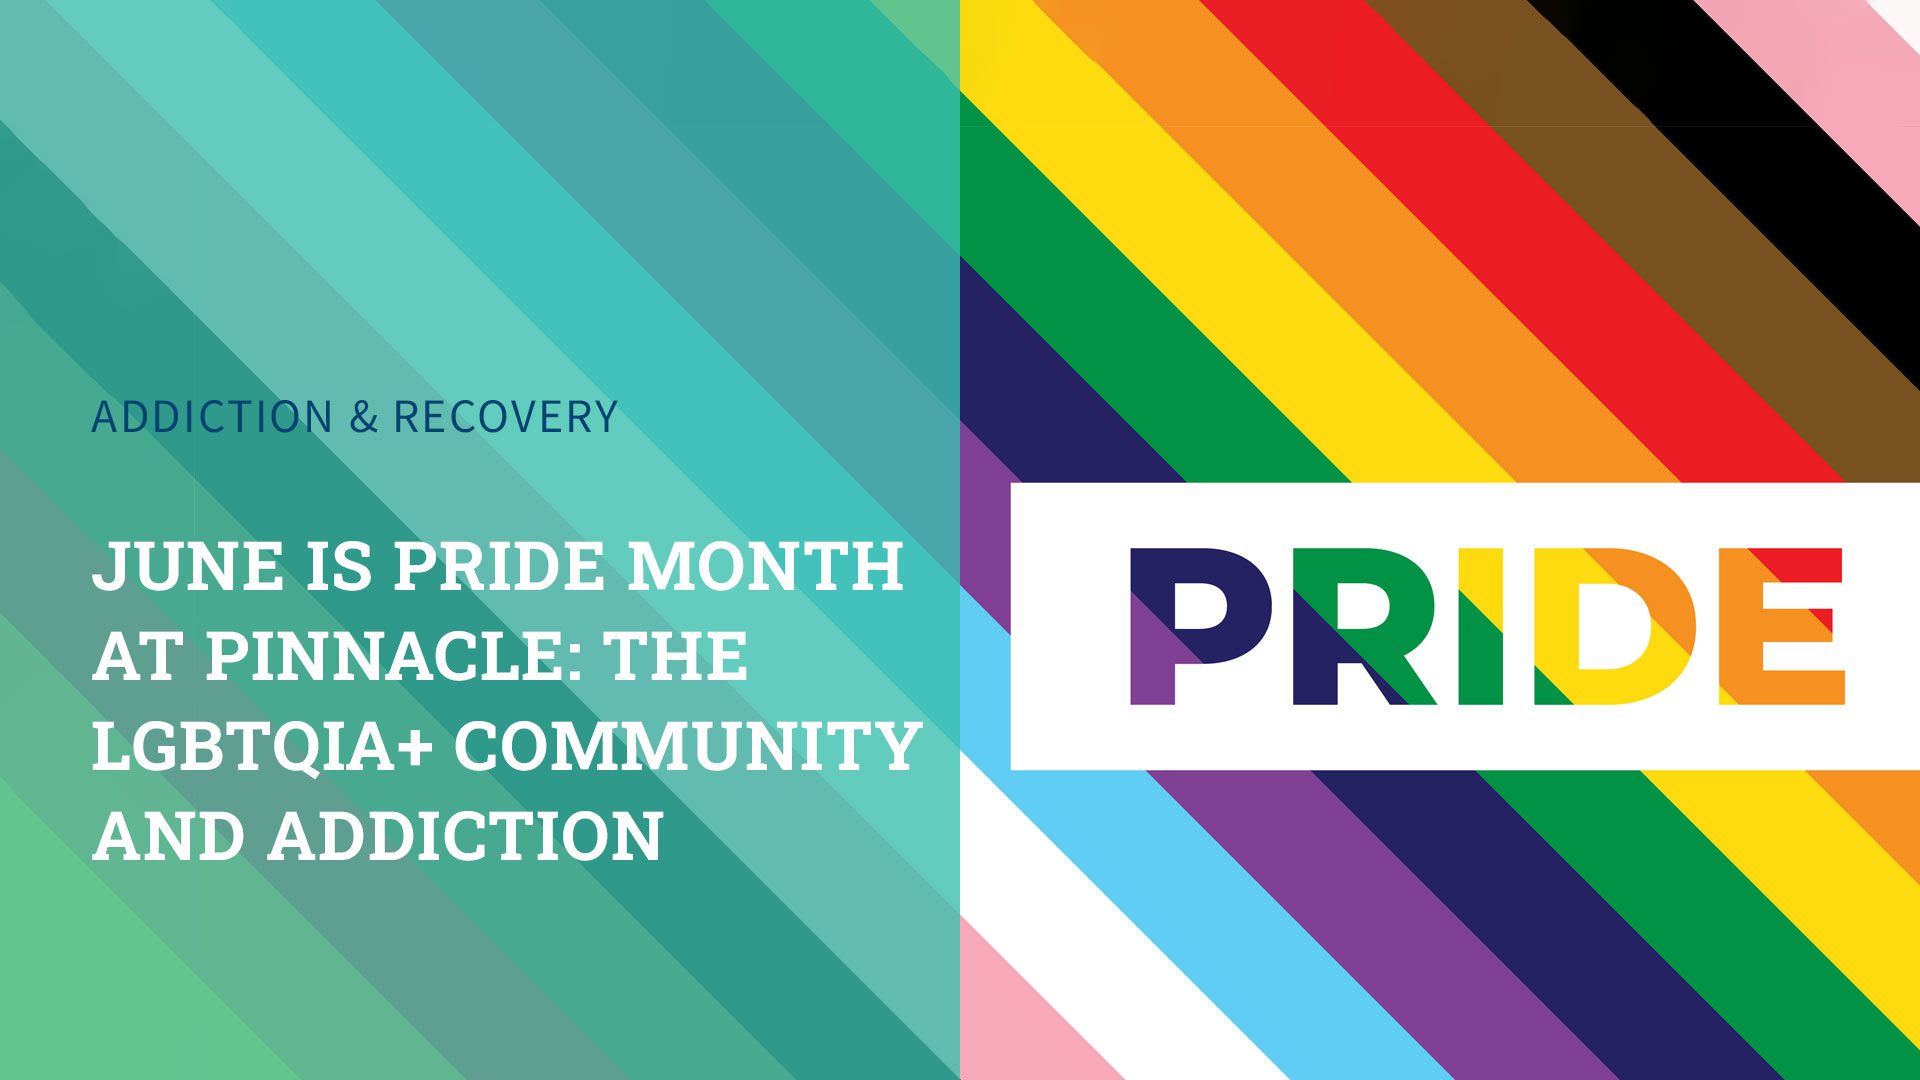 June is PRIDE Month at Pinnacle: The LGBTQIA+ Community and Addiction